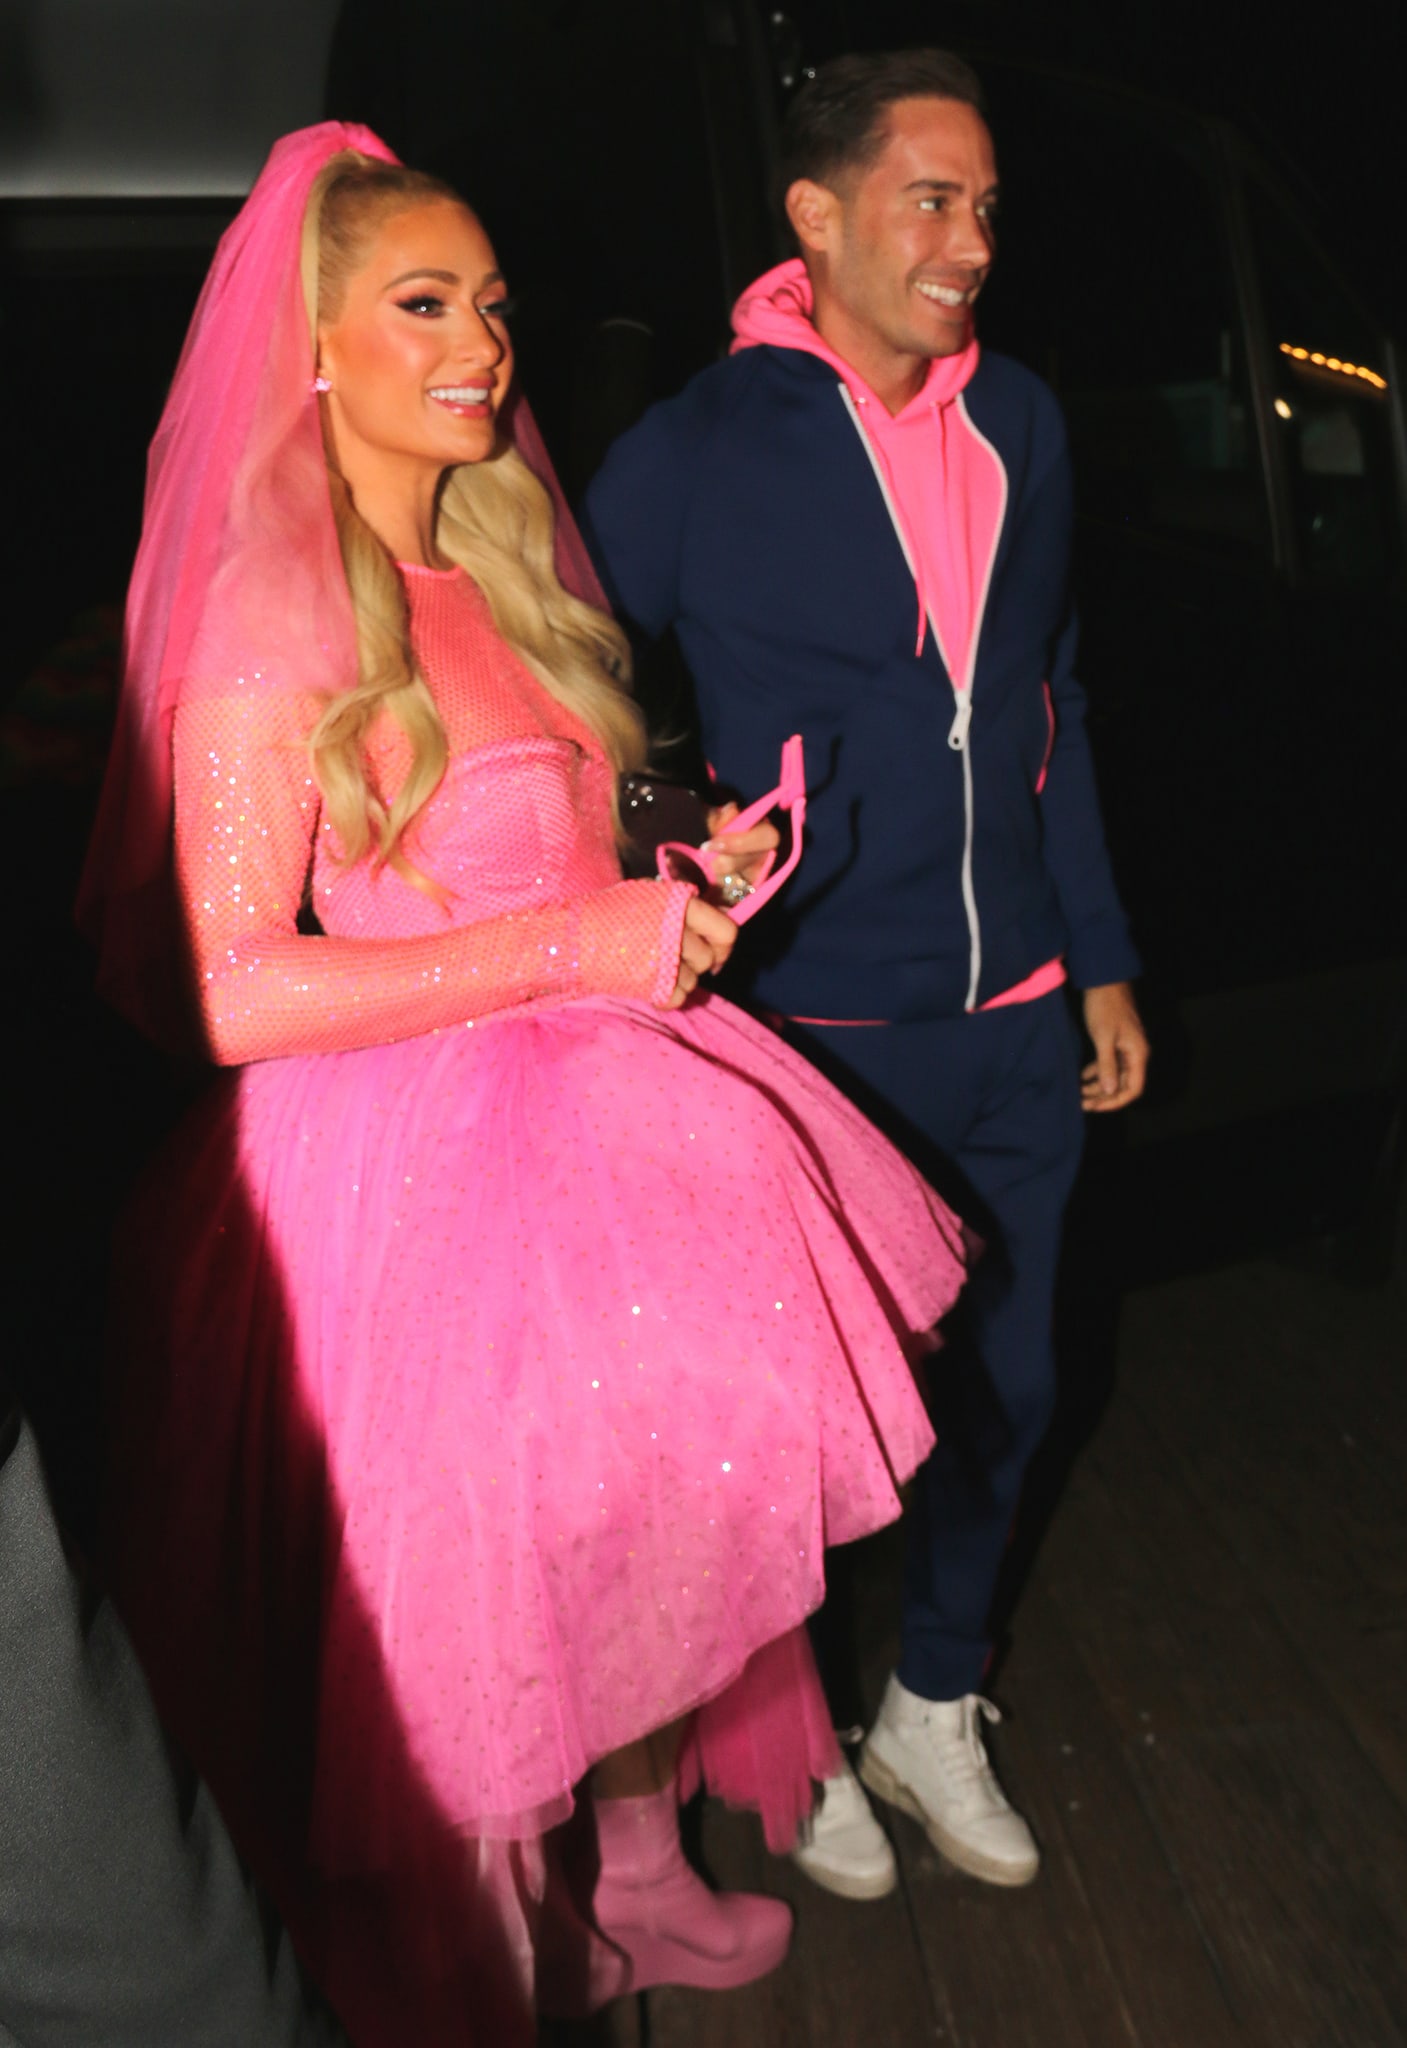 Paris Hilton's husband, Carter Reum, skillfully curates her ensemble, combining a captivating pink hoodie with a stylish navy and pink tracksuit